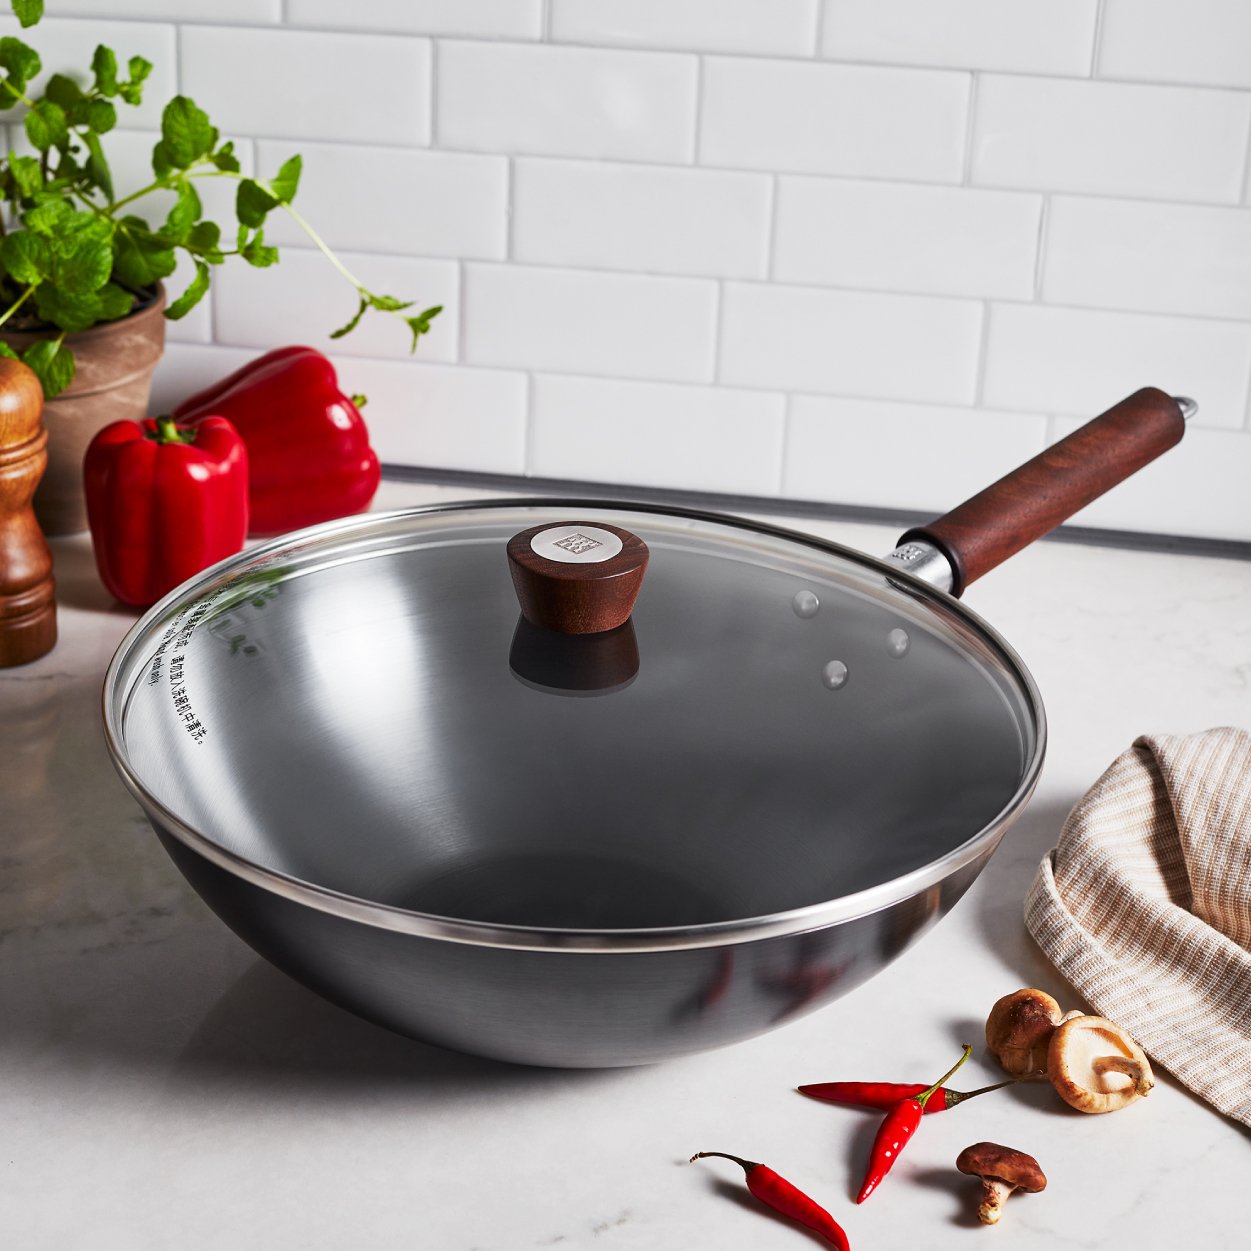 https://www.zwilling.com/on/demandware.static/-/Sites-zwilling-us-Library/default/dwd471179b/images/product-content/masonry-content/zwilling/cookware/dragon/DragonWok_Masonry_DragonWok_600-600_2.jpg